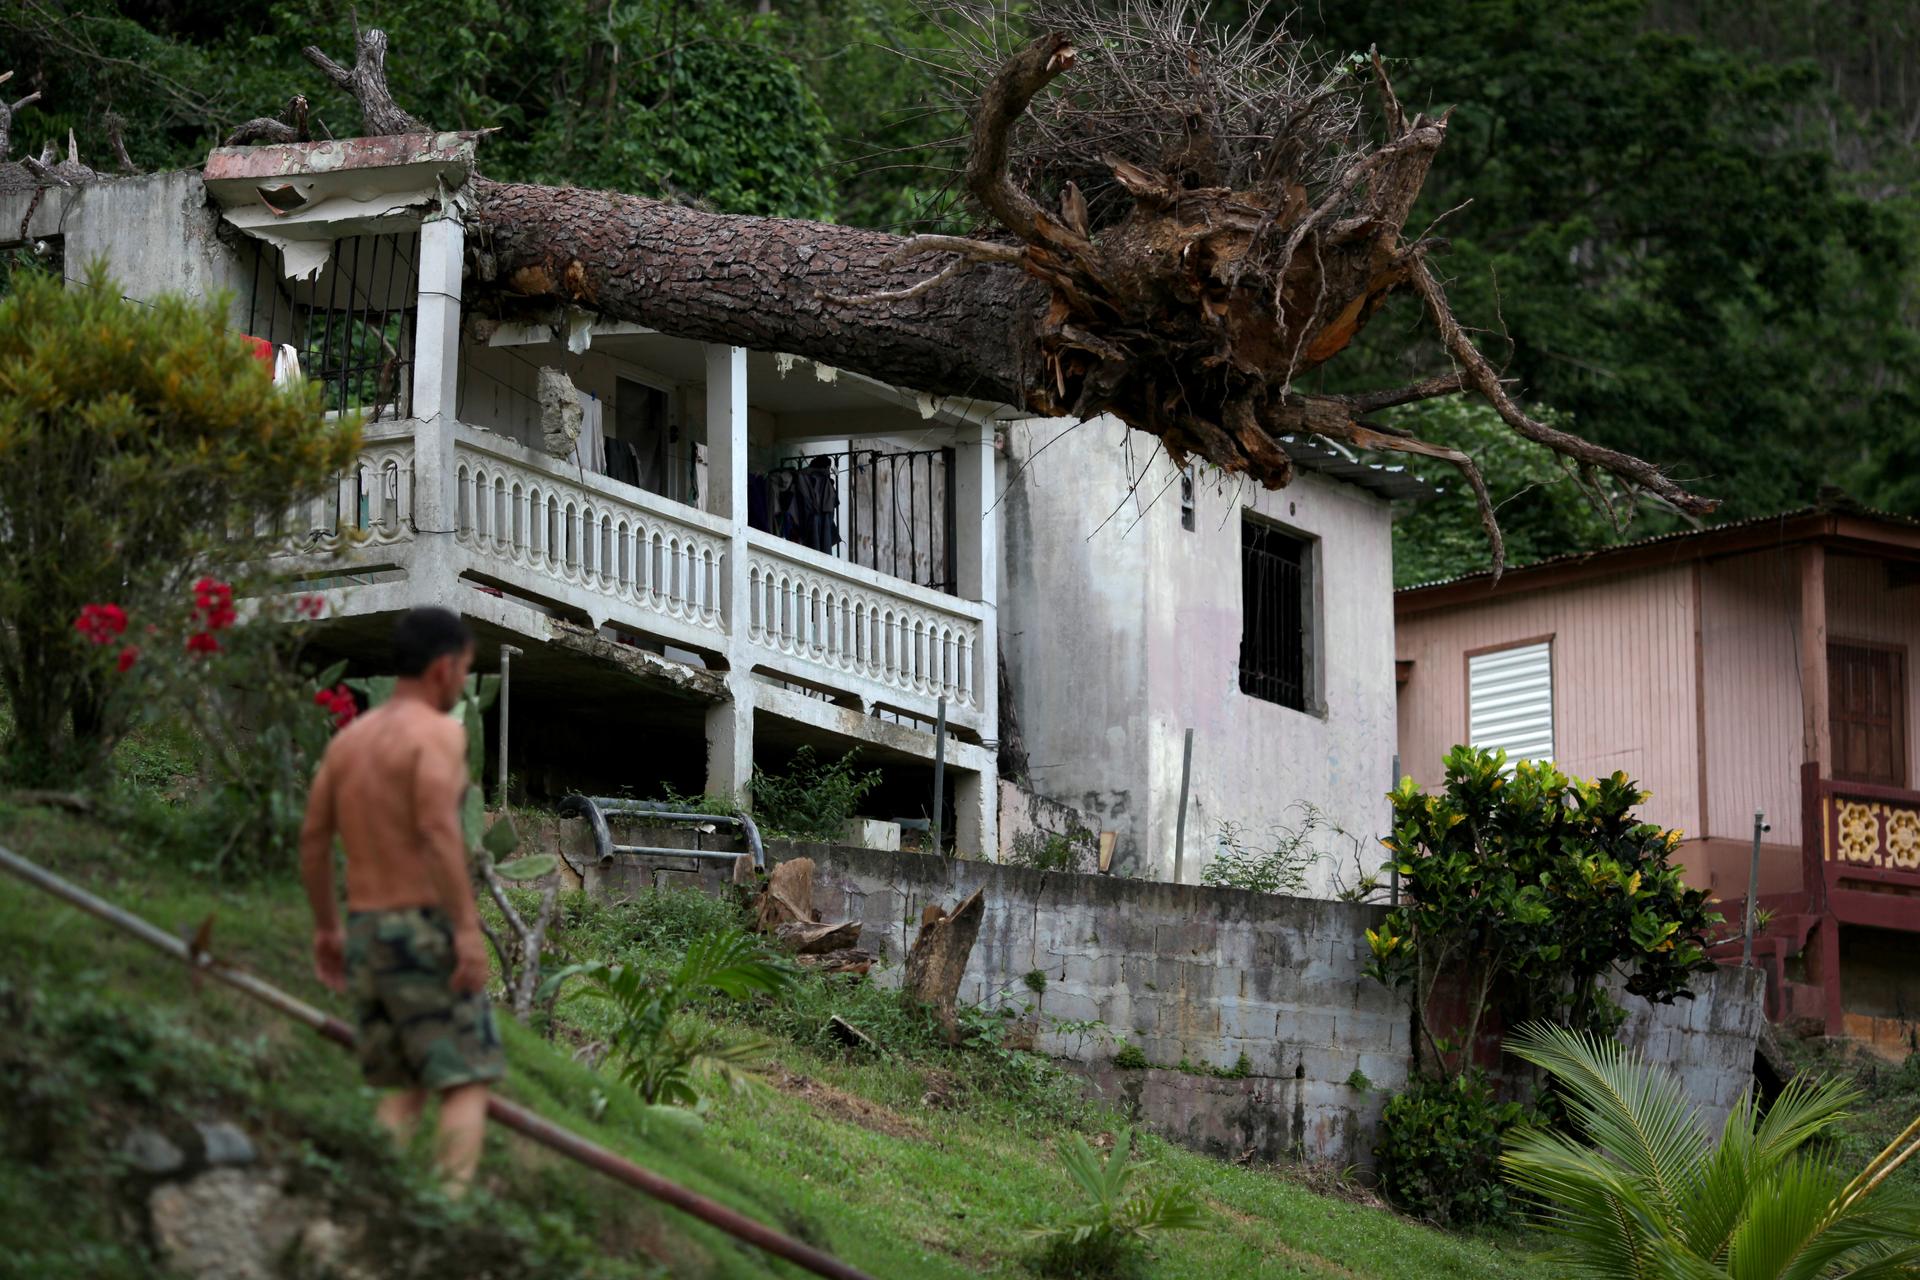 Months after Hurricane Maria slammed Puerto Rico, damage like this fallen tree on a roof in Utuado have yet to be repaired.